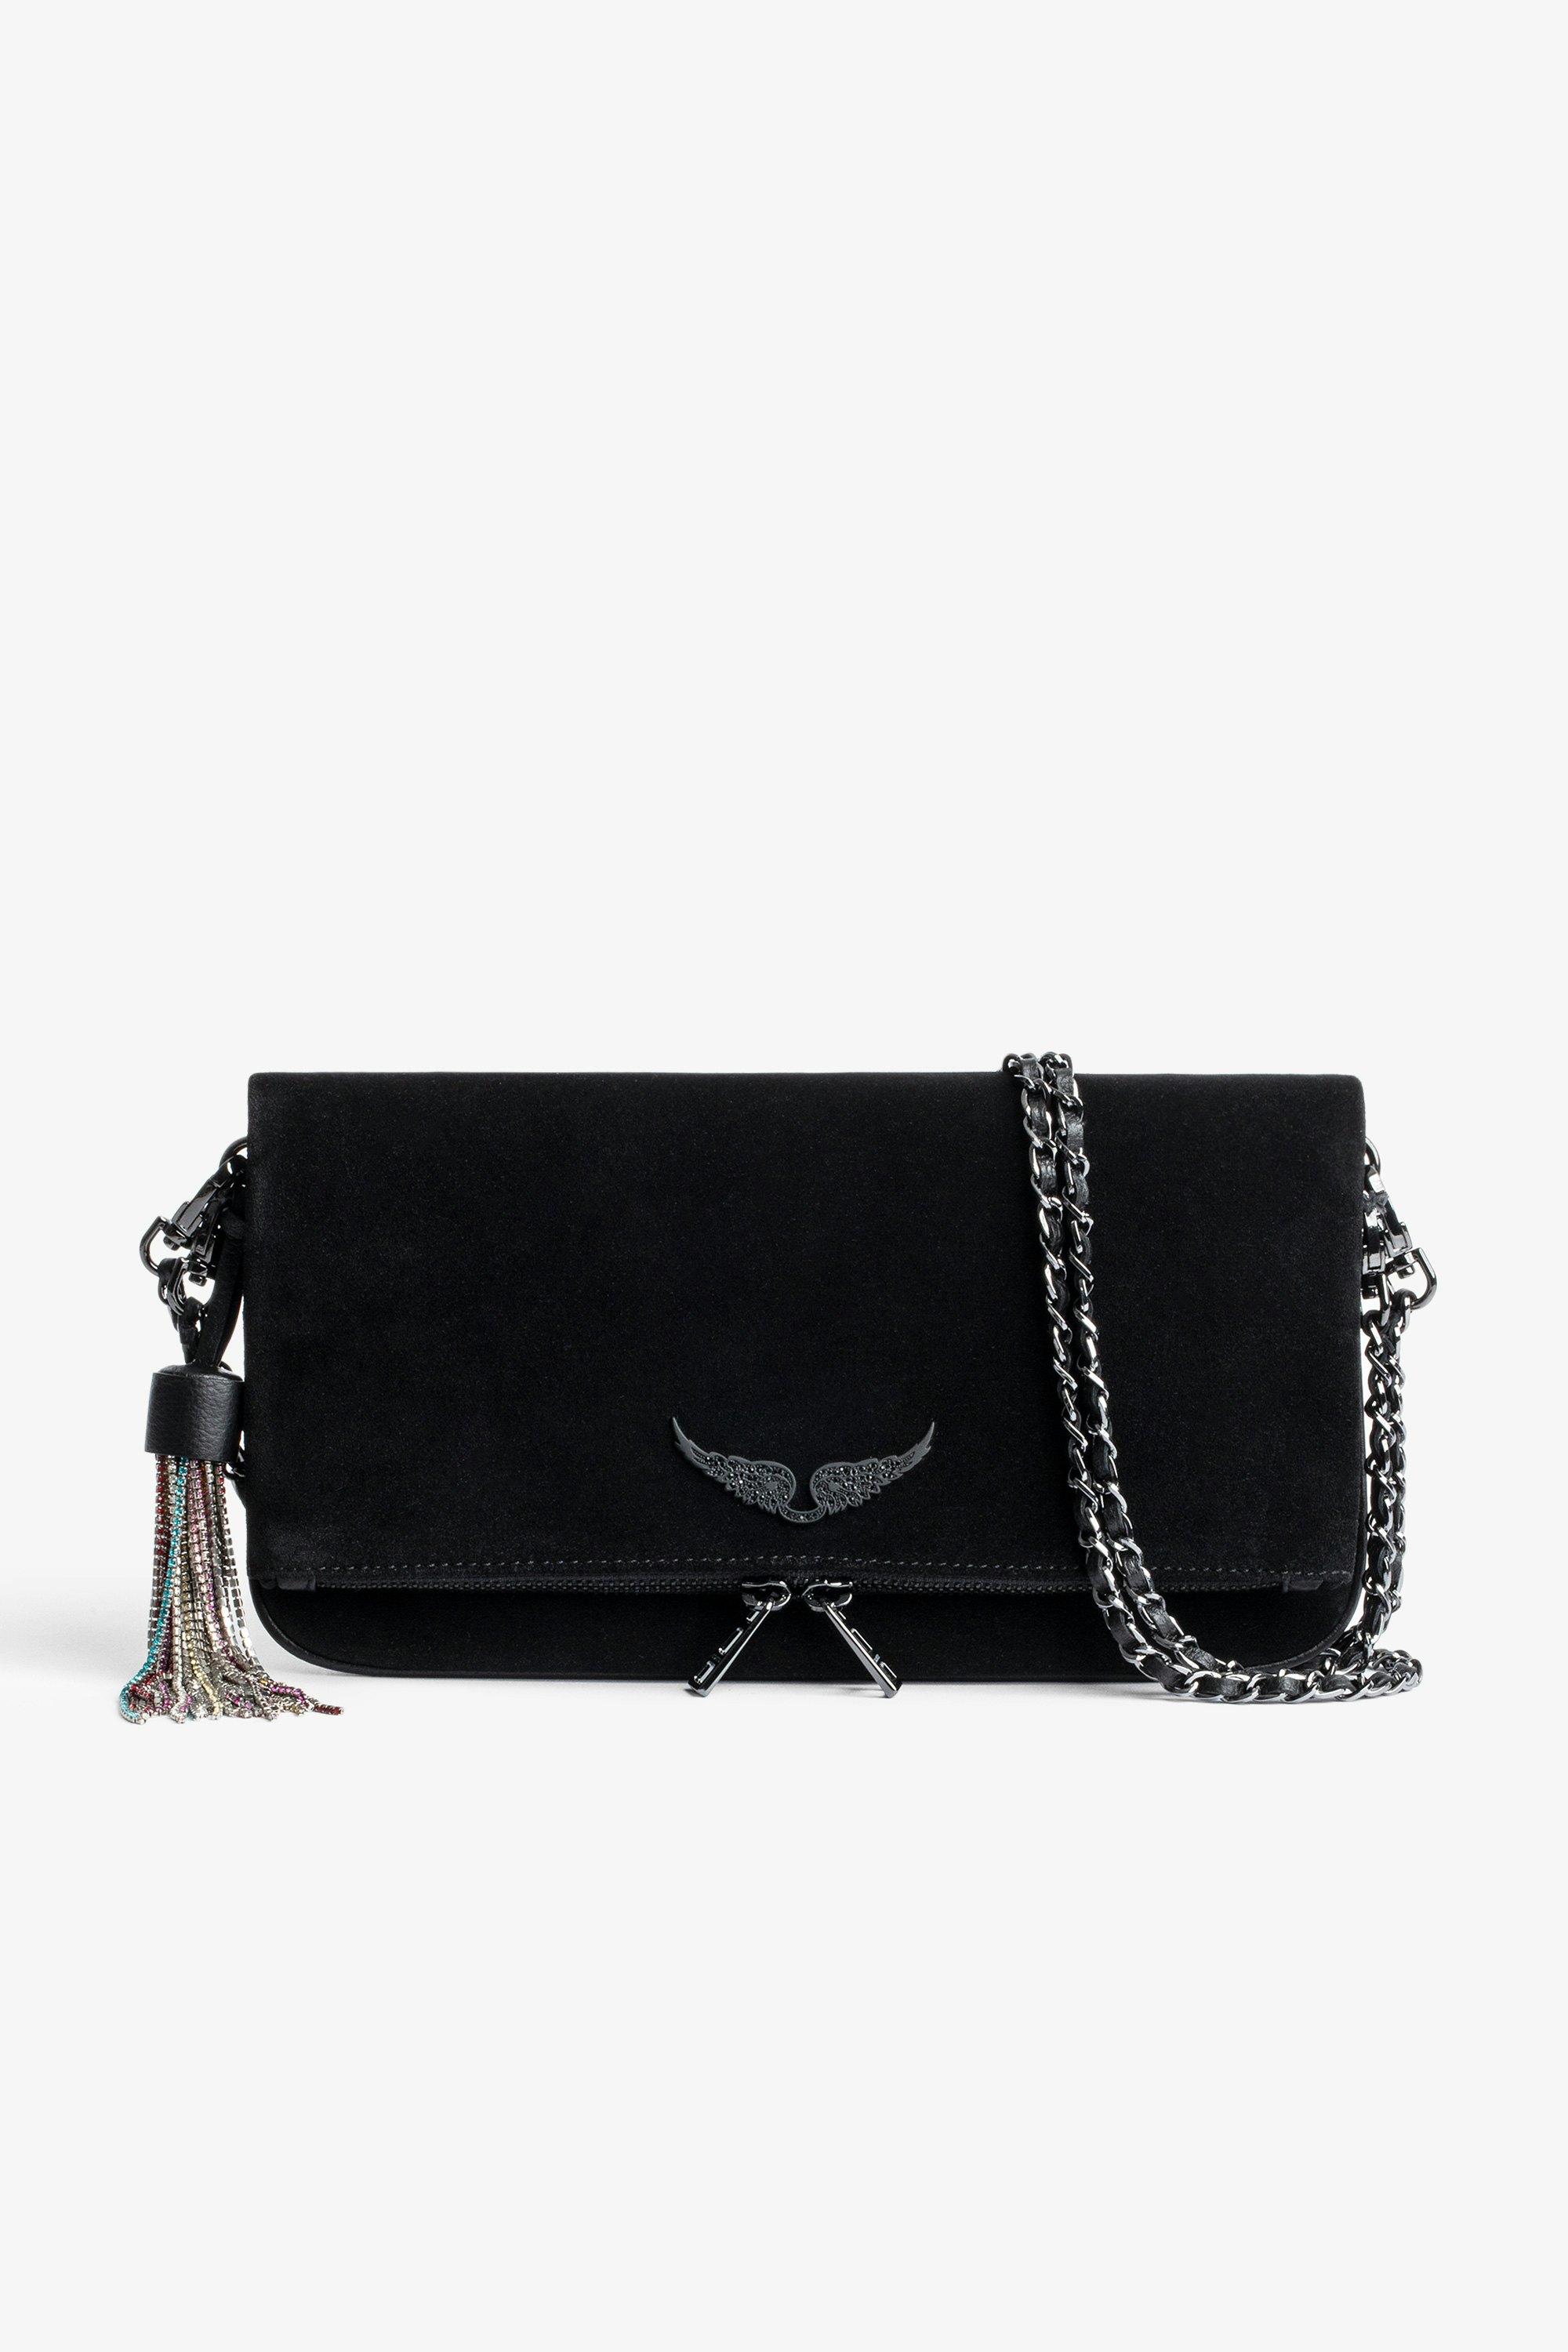 Rock Suede クラッチバッグ Women’s black suede clutch with crystal-embellished pendant